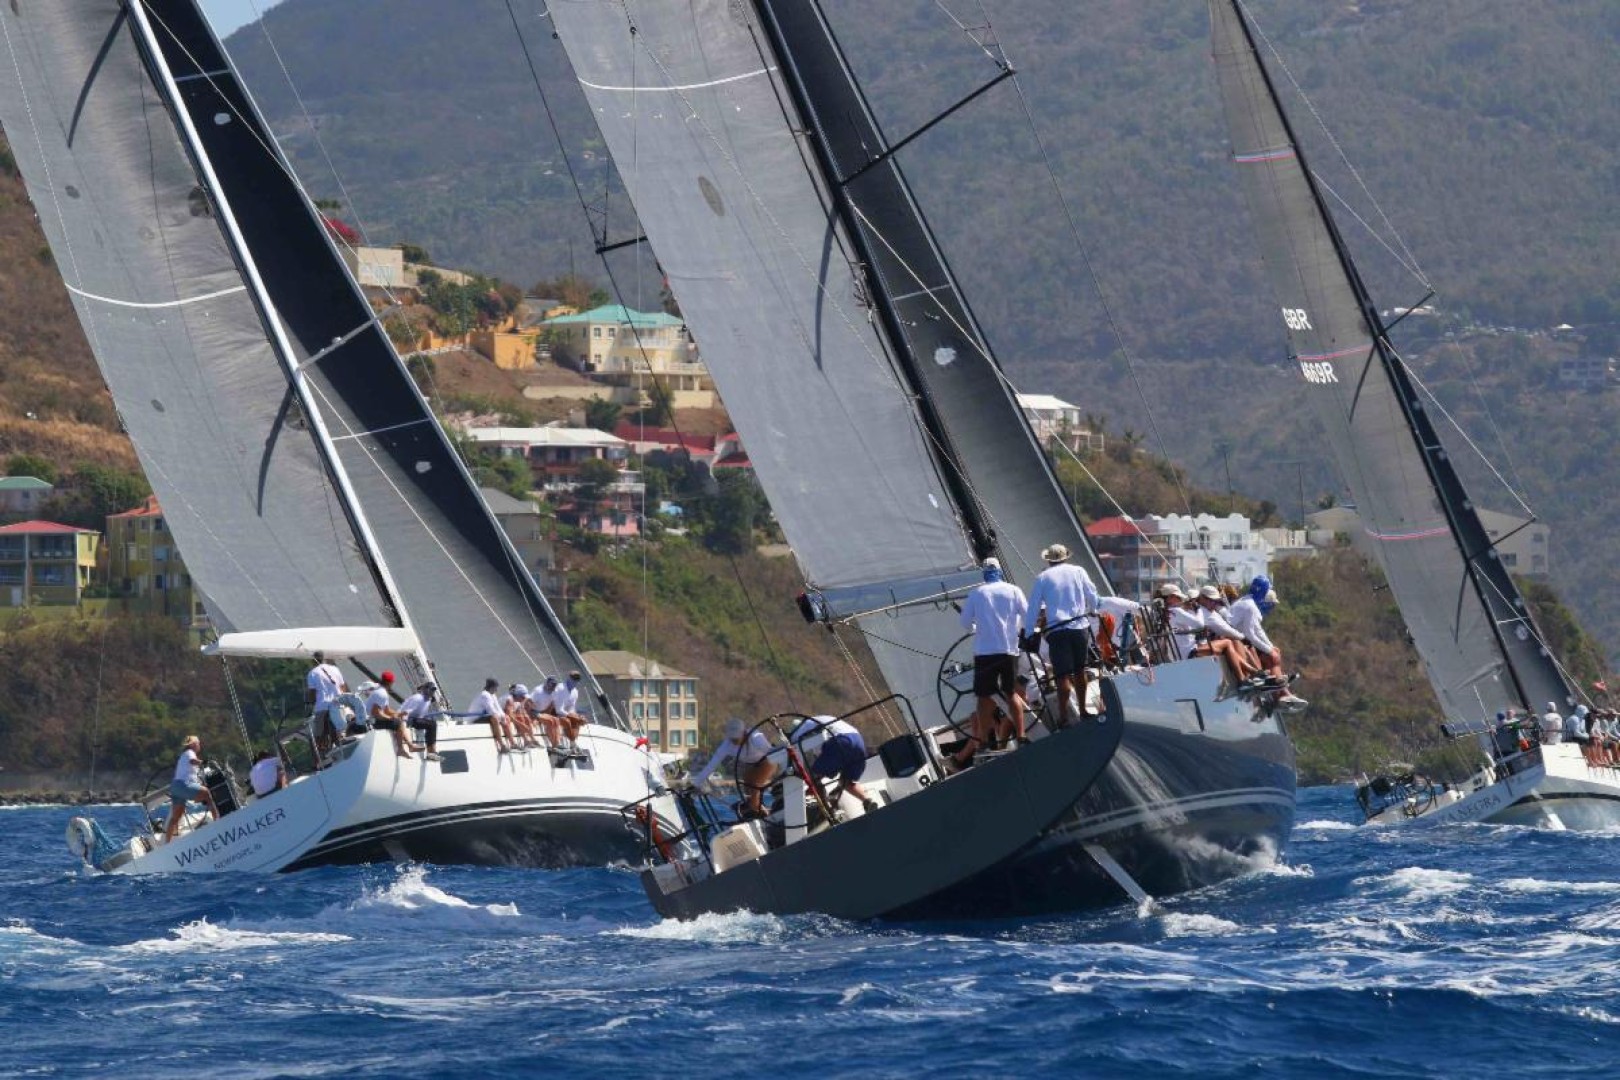 Checking off the bucket list - racing at the BVI Spring Regatta & Sailing Festival © Ingrid Abery